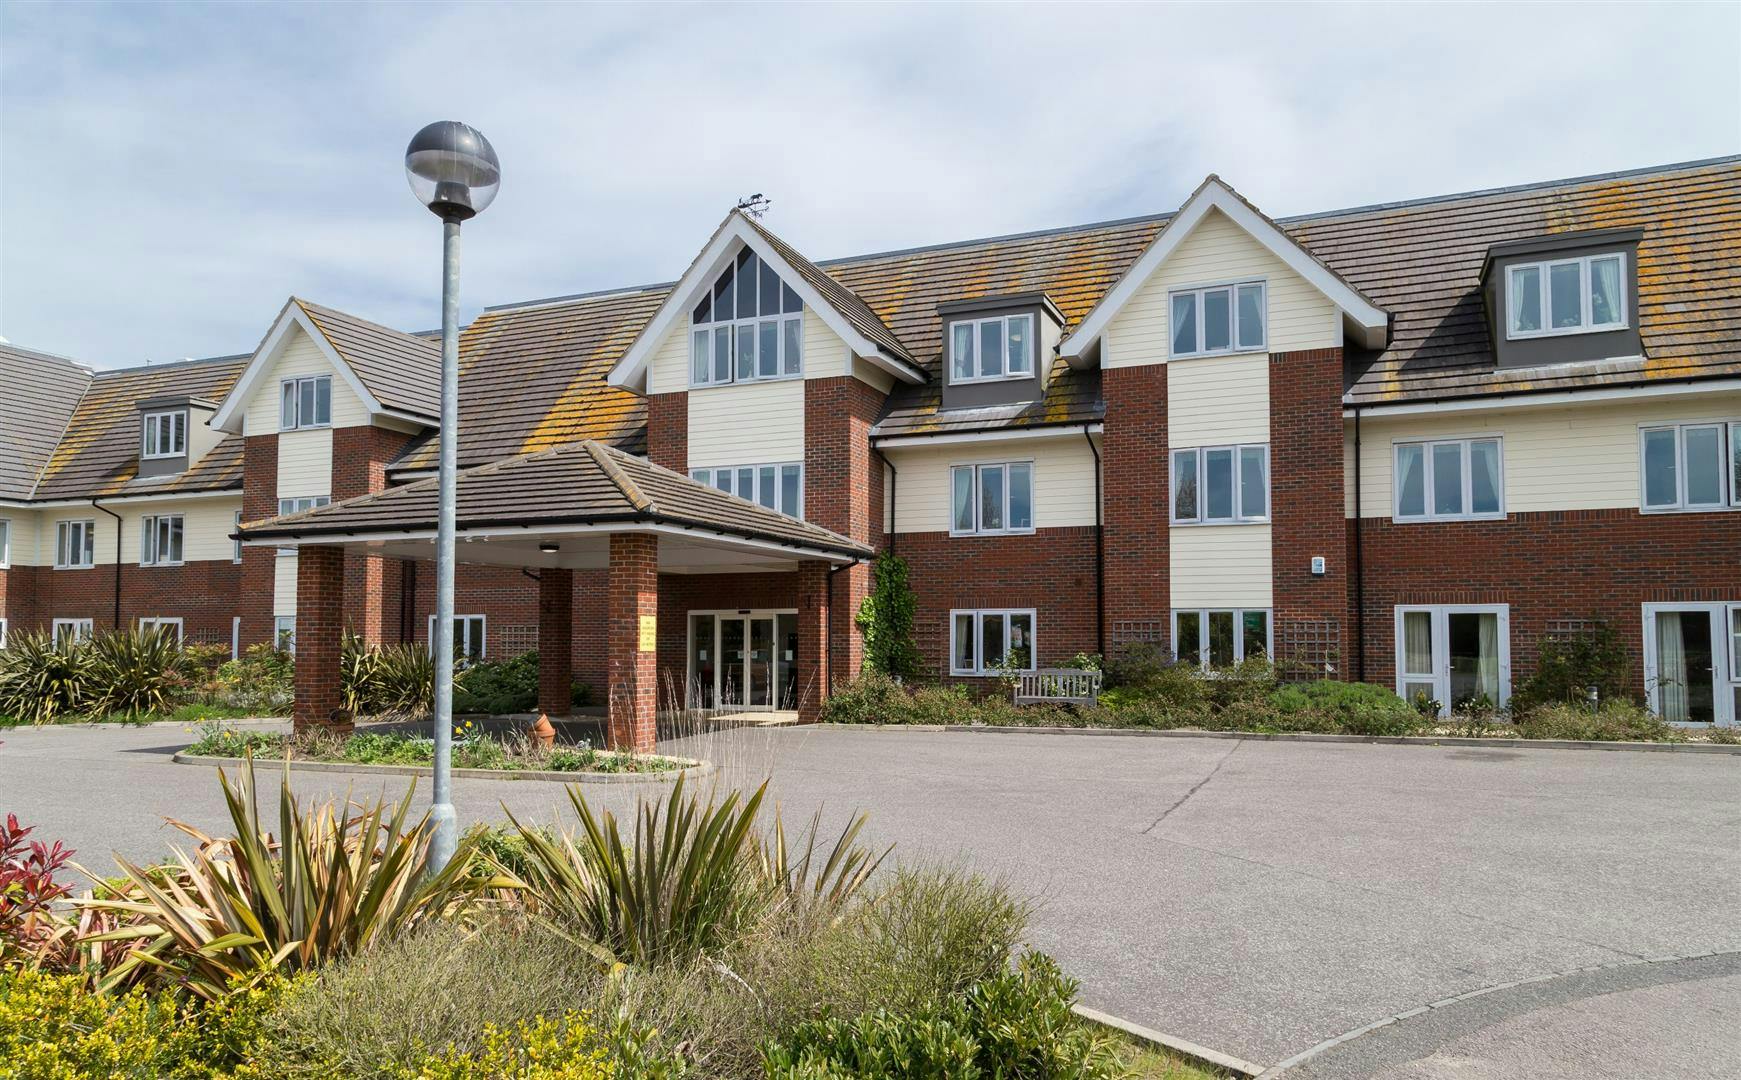 Exterior of Alice Grange Care Home in Kesgrave, East Suffolk